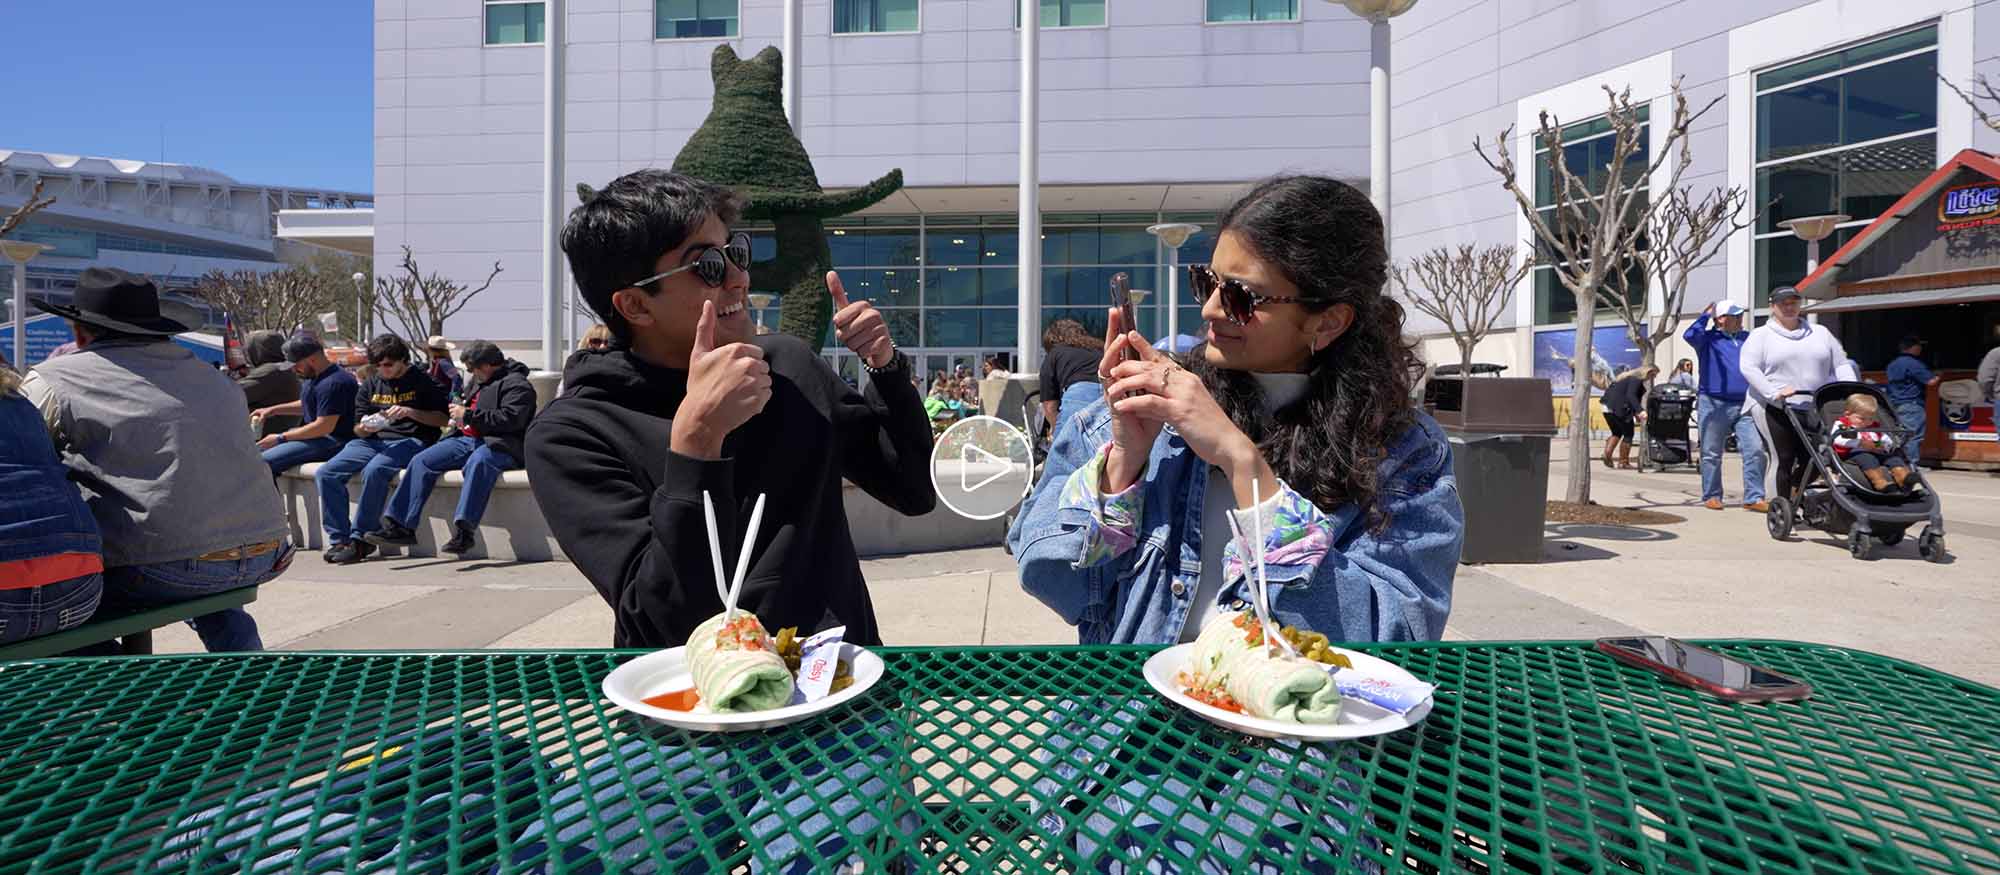 Naman, sitting at a picnic table on the left, turns smiling and holding two thumbs up to Devika on the right, who is taking a picture of him with her phone. There are two large burritos on plates in front of them.